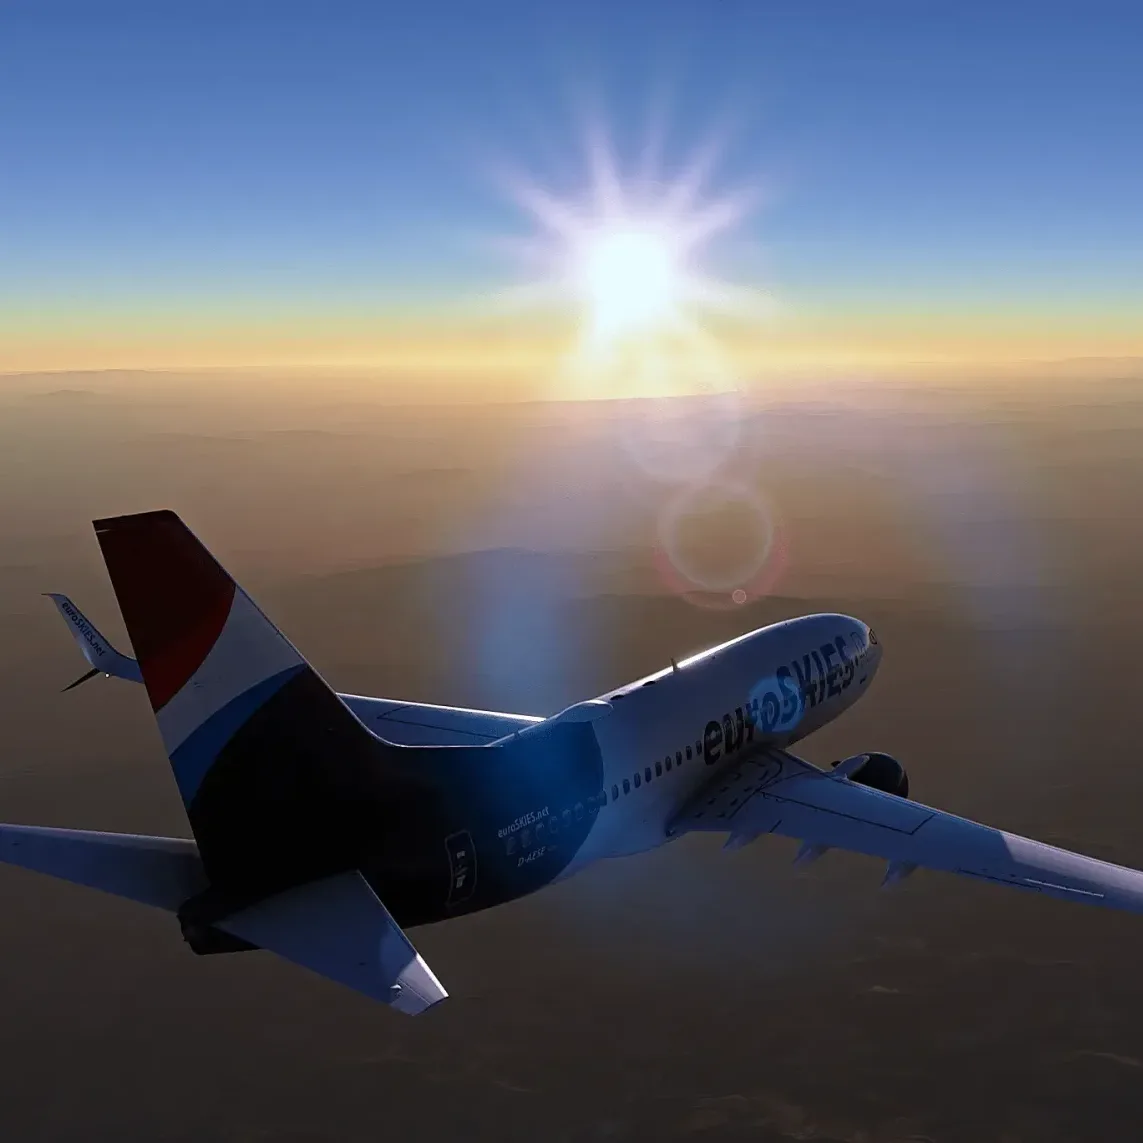 euroSKIES virtual airline PMDG 737-700 with the low sun over the continent near the coast, with the sun reflecting on the water